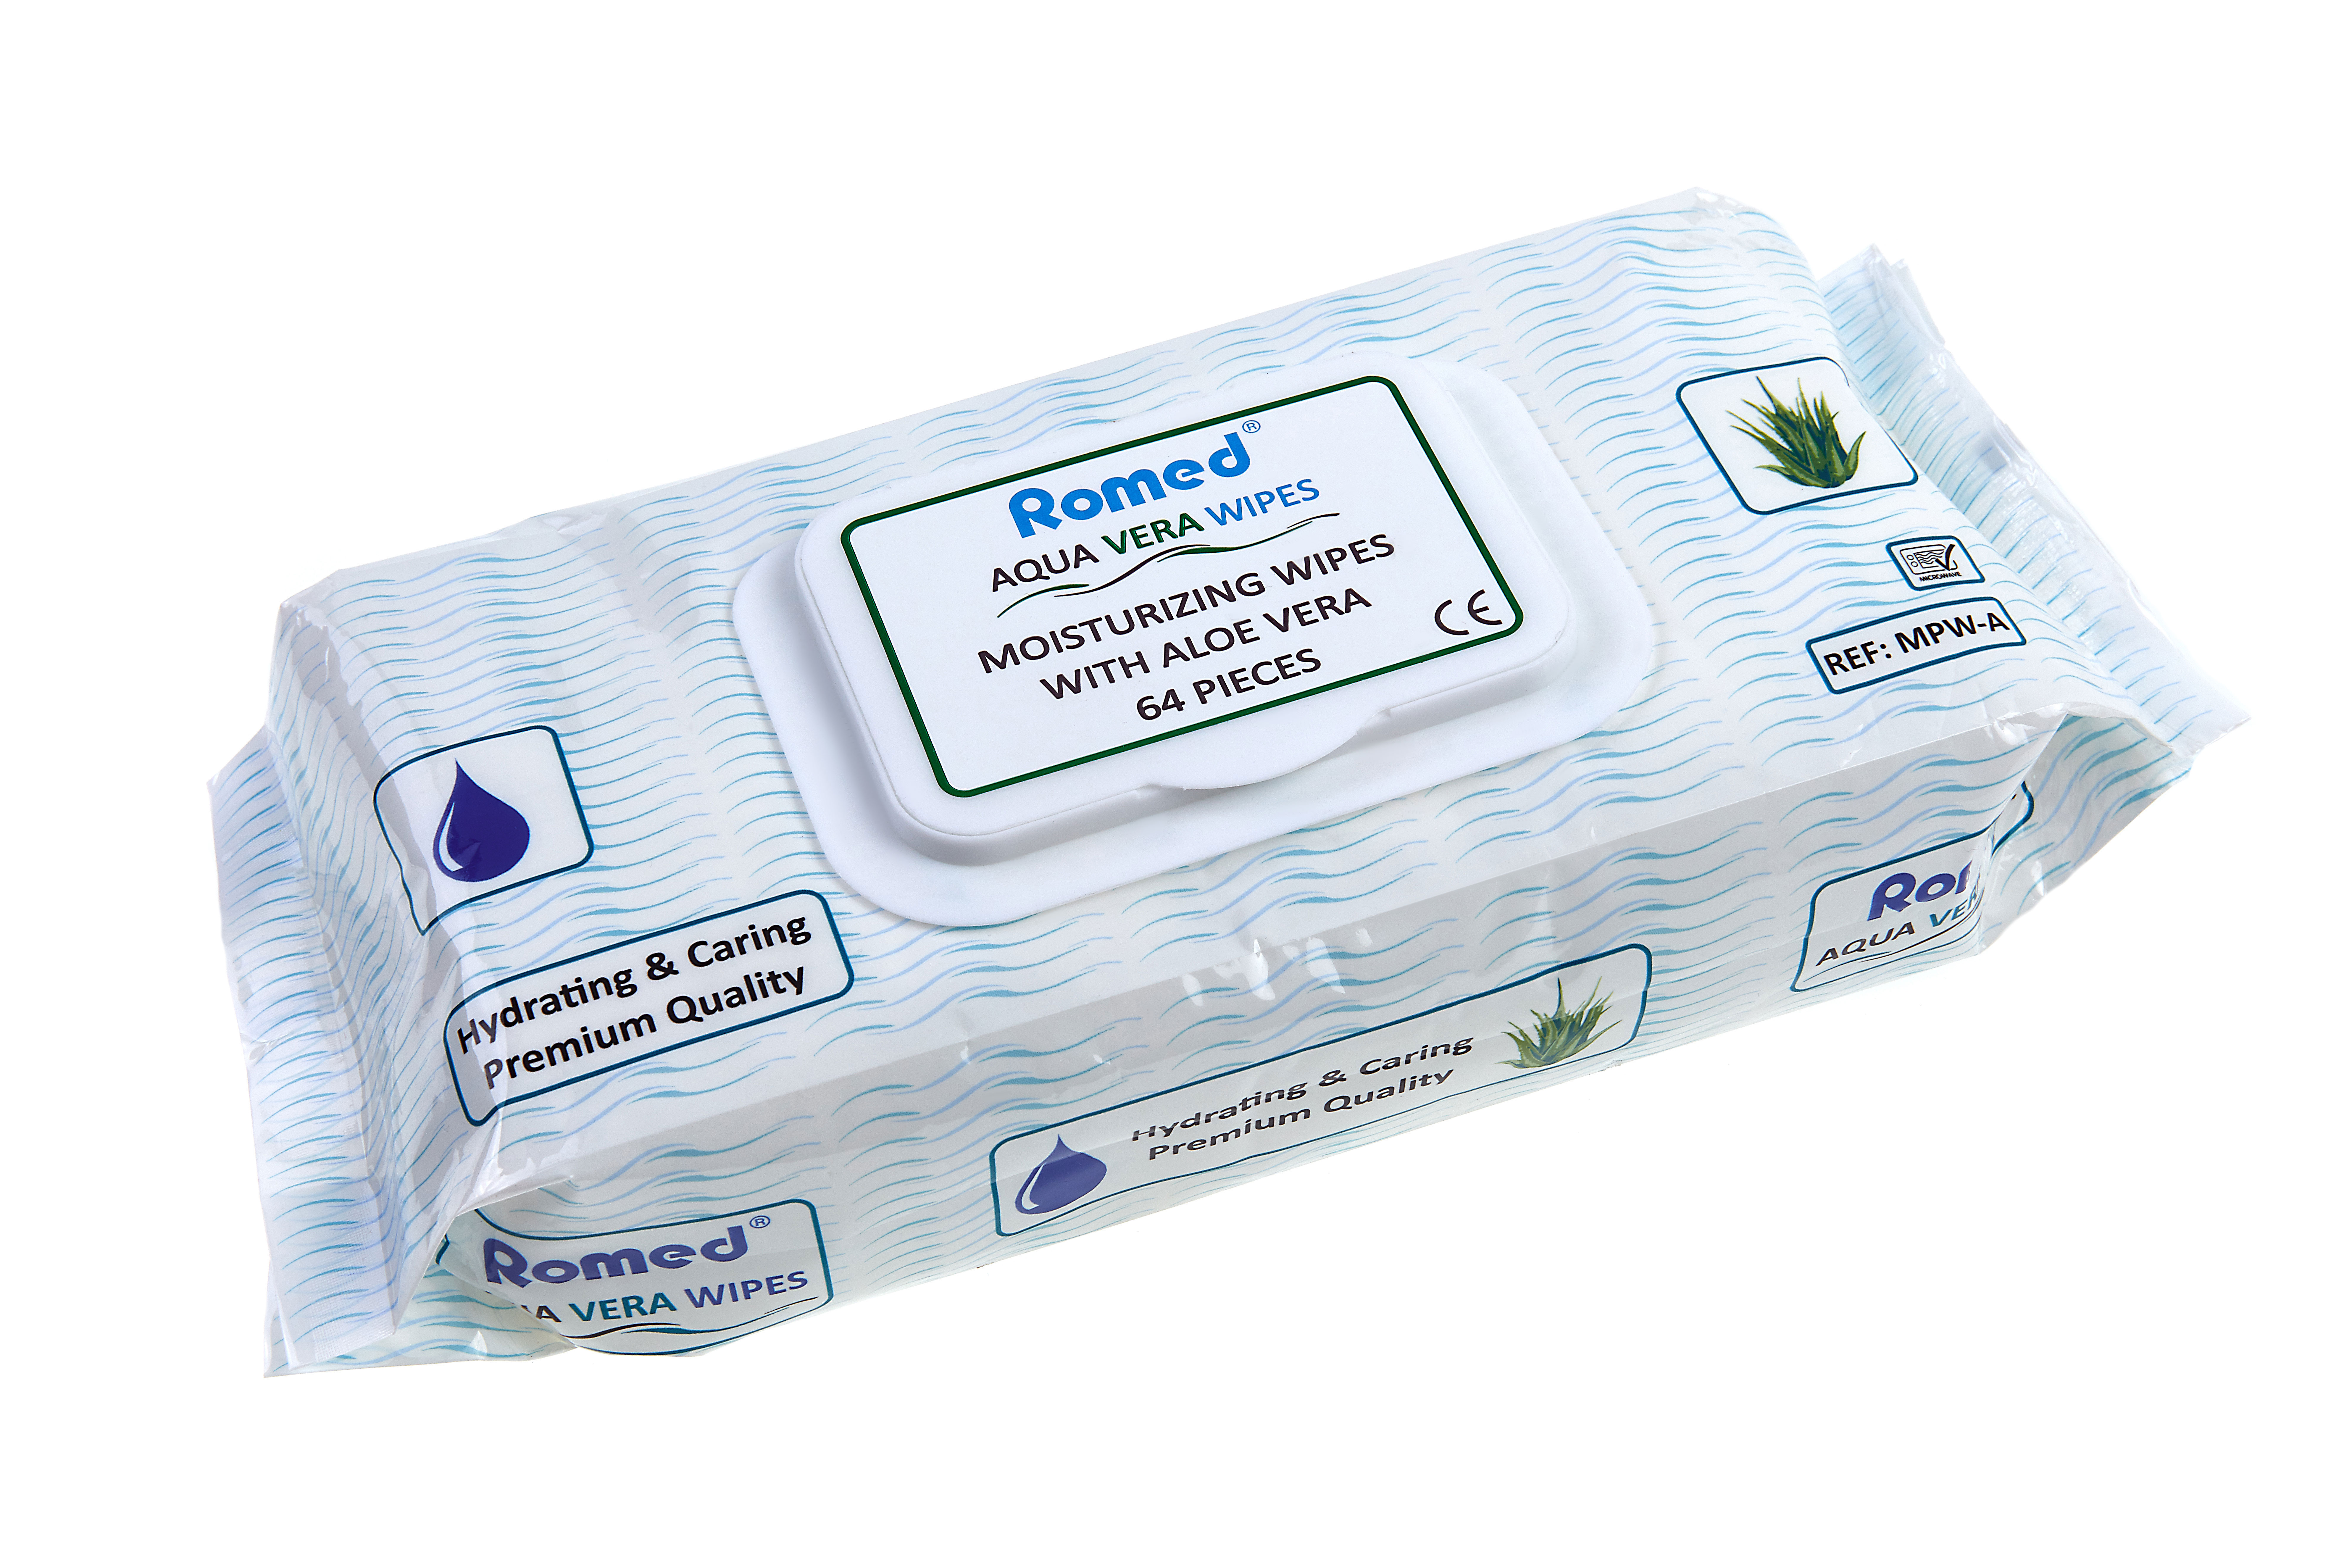 MPW-A Romed moist patient wipes, with Aloë Vera, 64 pcs in a dispenser bag, 12 dispenser bags in a carton.